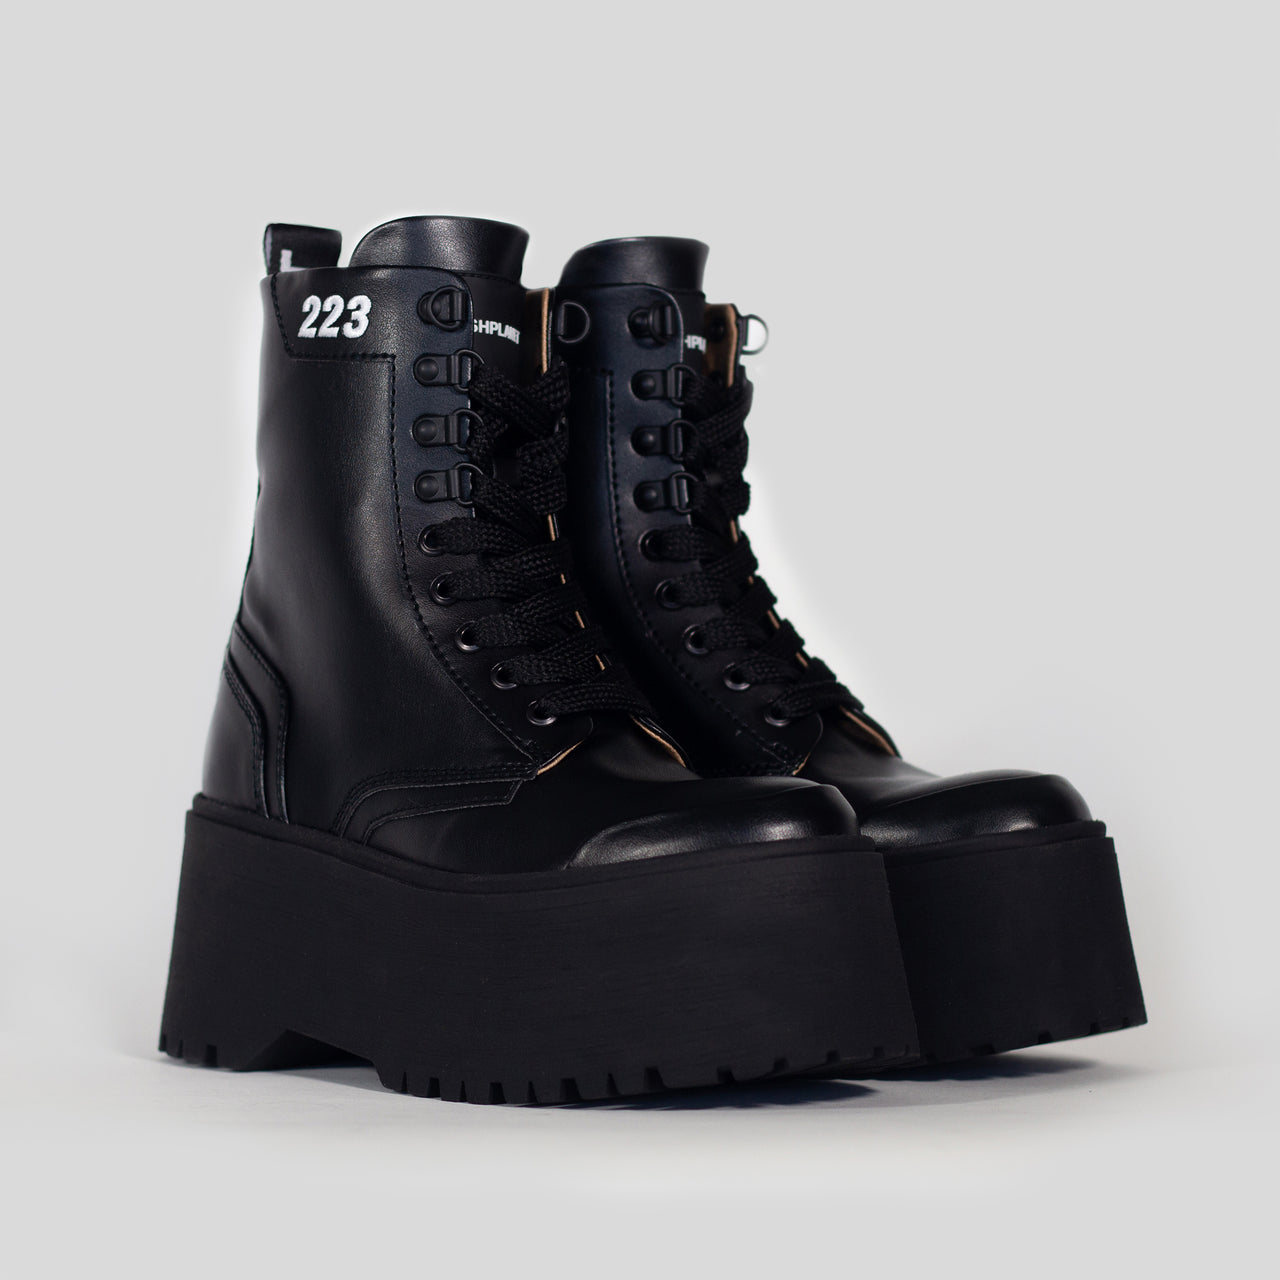 RIOT! BOOT 223 "ONYX"